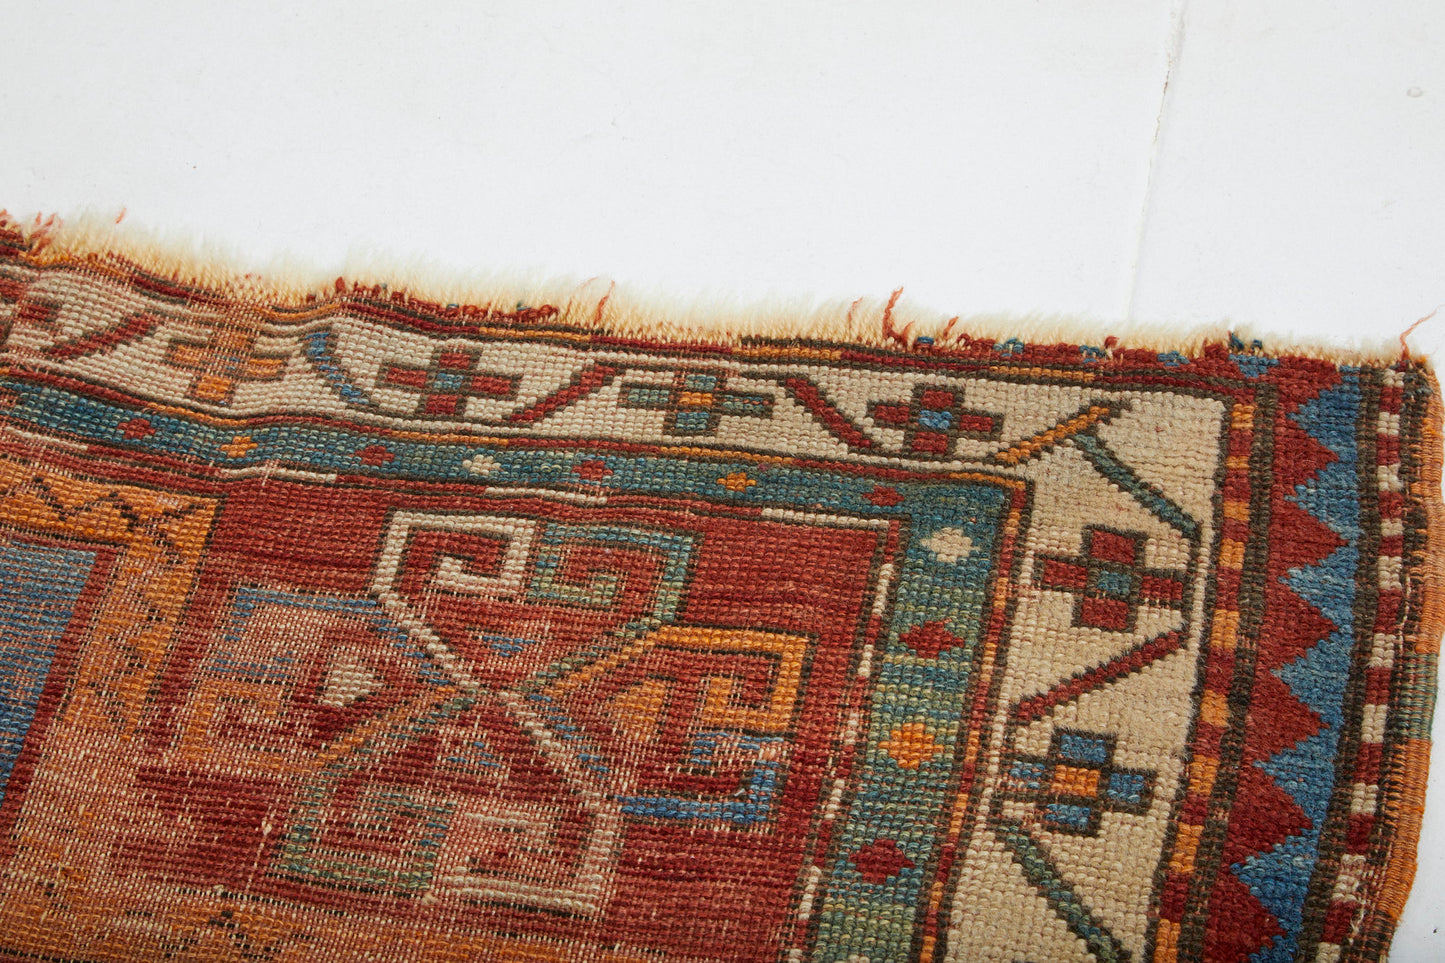 Antique hand woven Kazak Persian Rug with red, tan, blue and cream colors - Available from King Kennedy Rugs Los Angeles